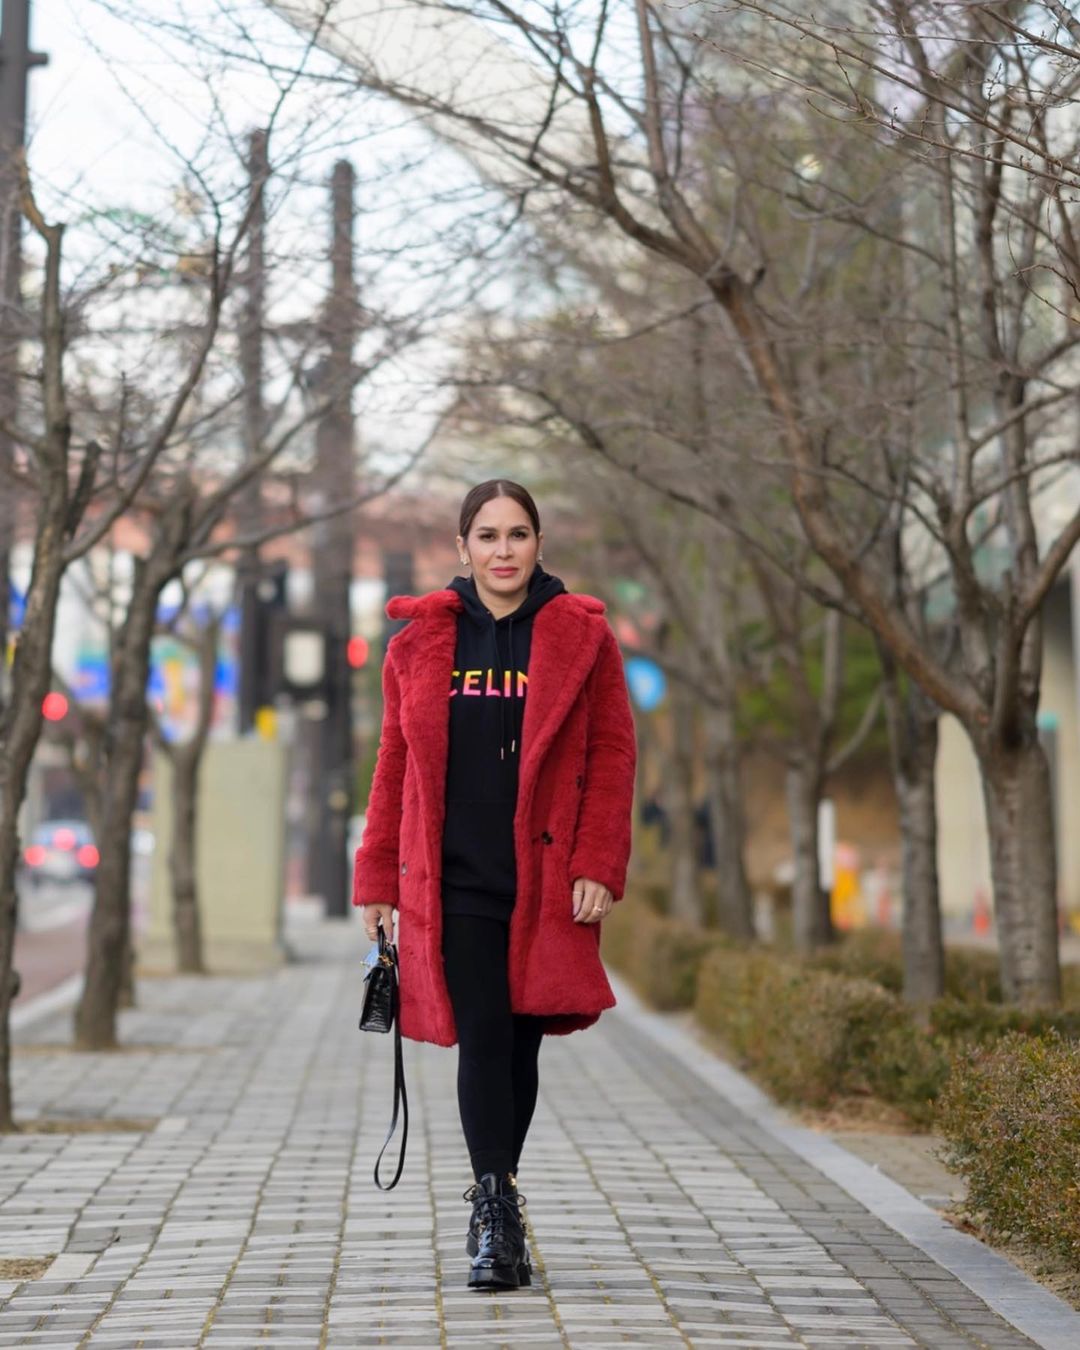 Look: Jinkee Pacquiao's Designer Outfits In Seoul, South Korea